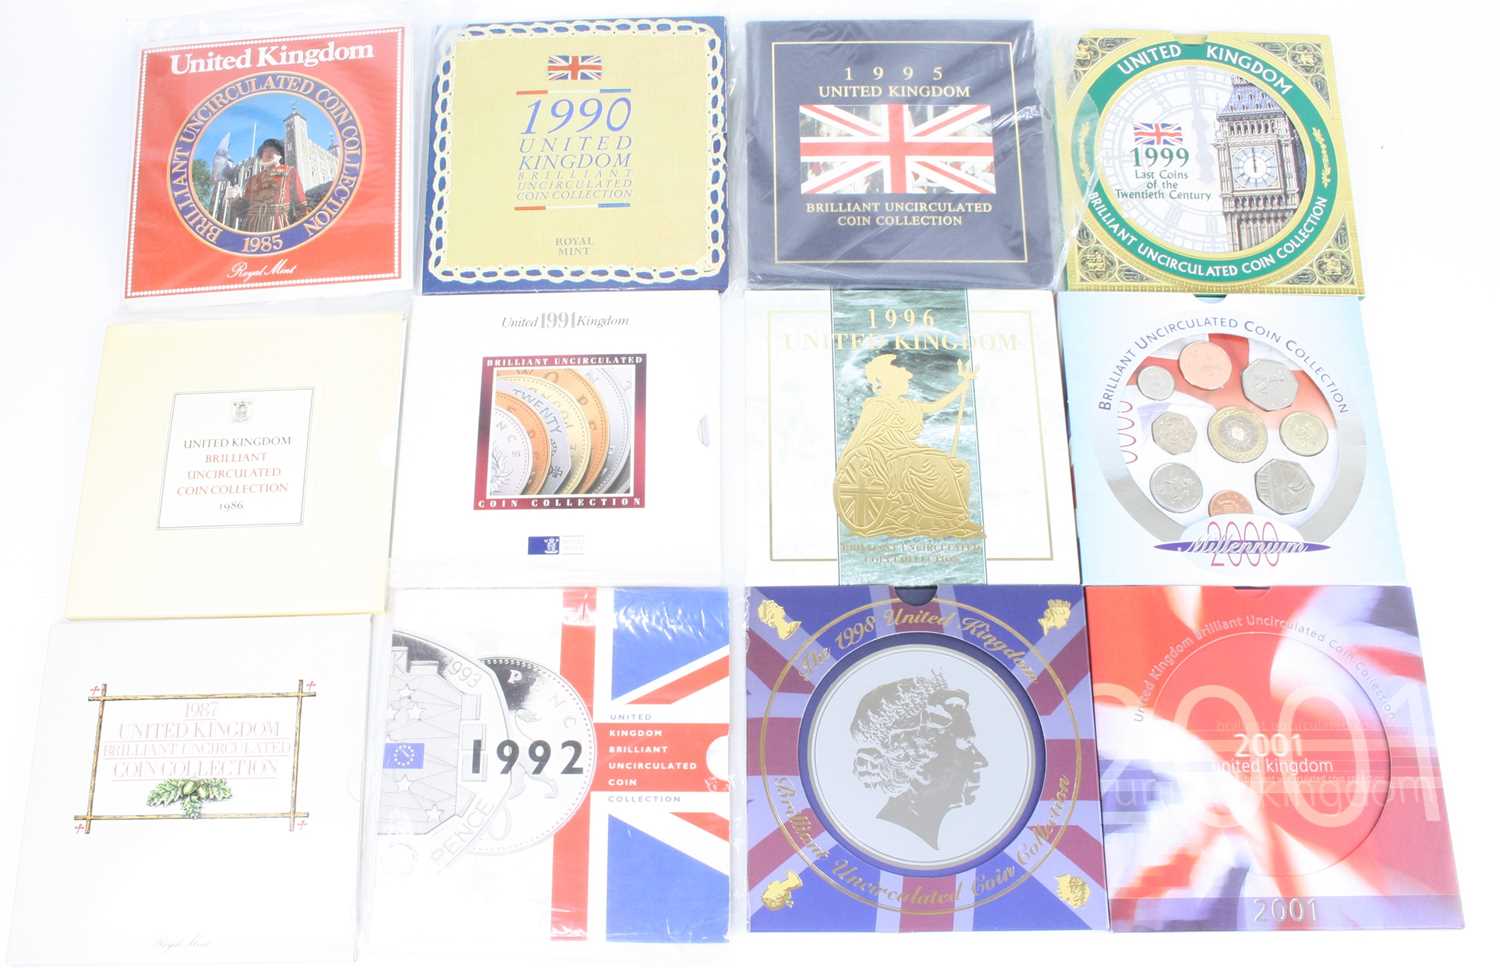 United Kingdom, a collection of Brilliant Uncirculated Coin Sets for the years 1984-1987, 1990-1992,